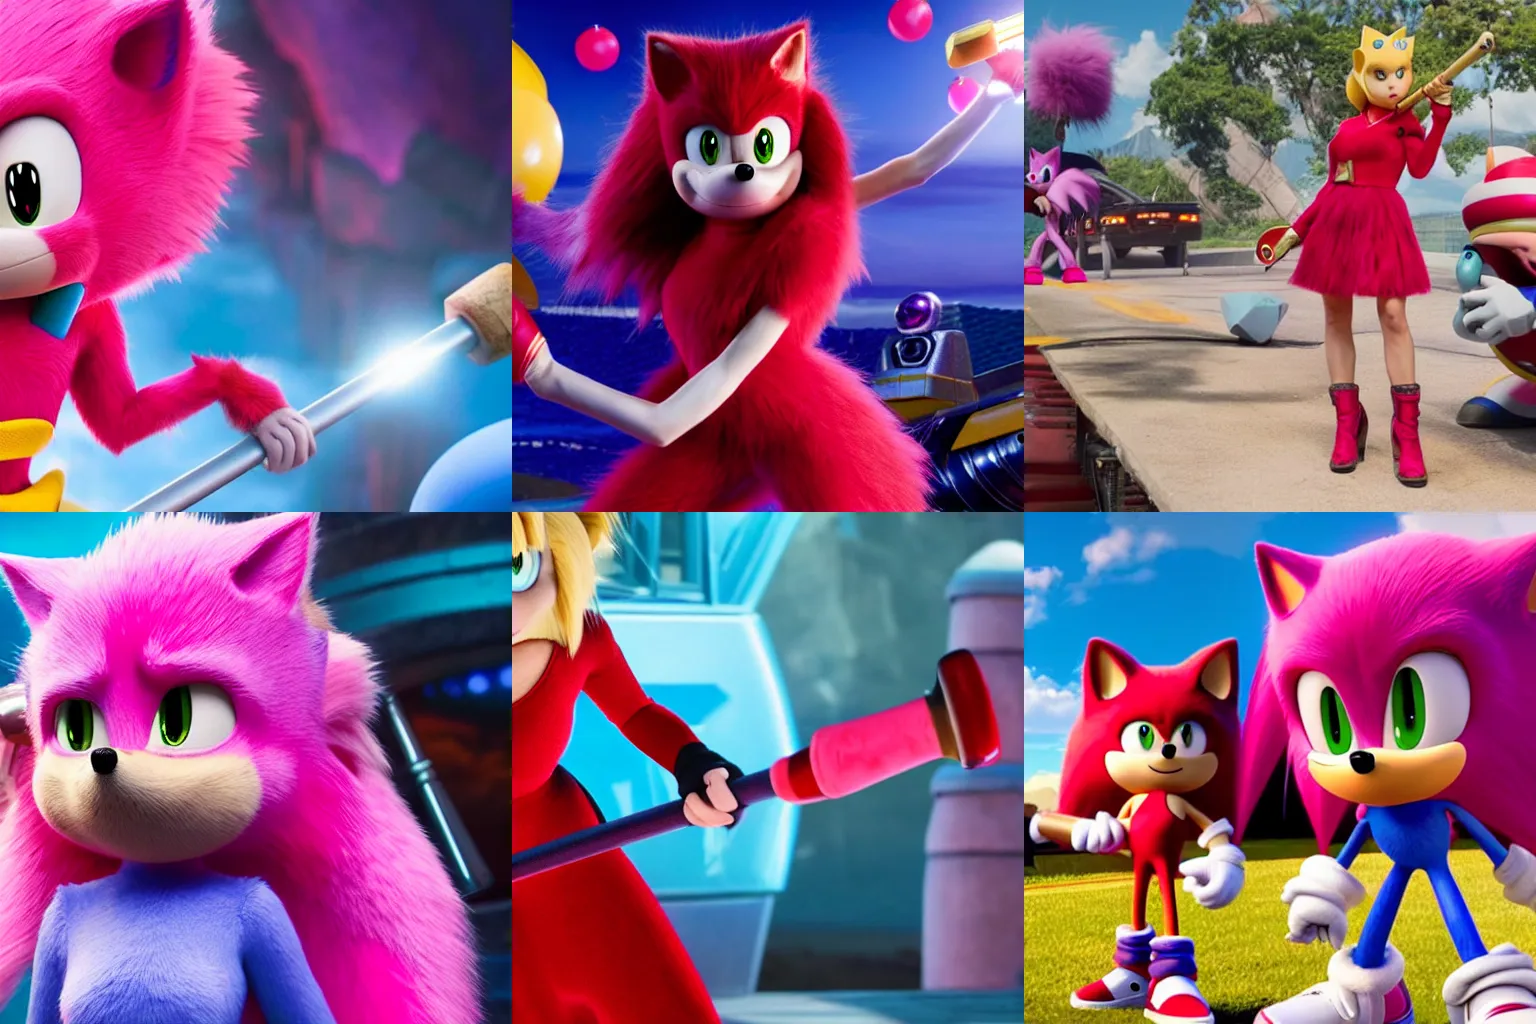 Prompt: A still of Amy Rose holding her hammer in the Sonic the Hedgehog movie by Paramount, promotional image, red dress, pink fur, eyelashes, 4k HD, f2.8 50mm